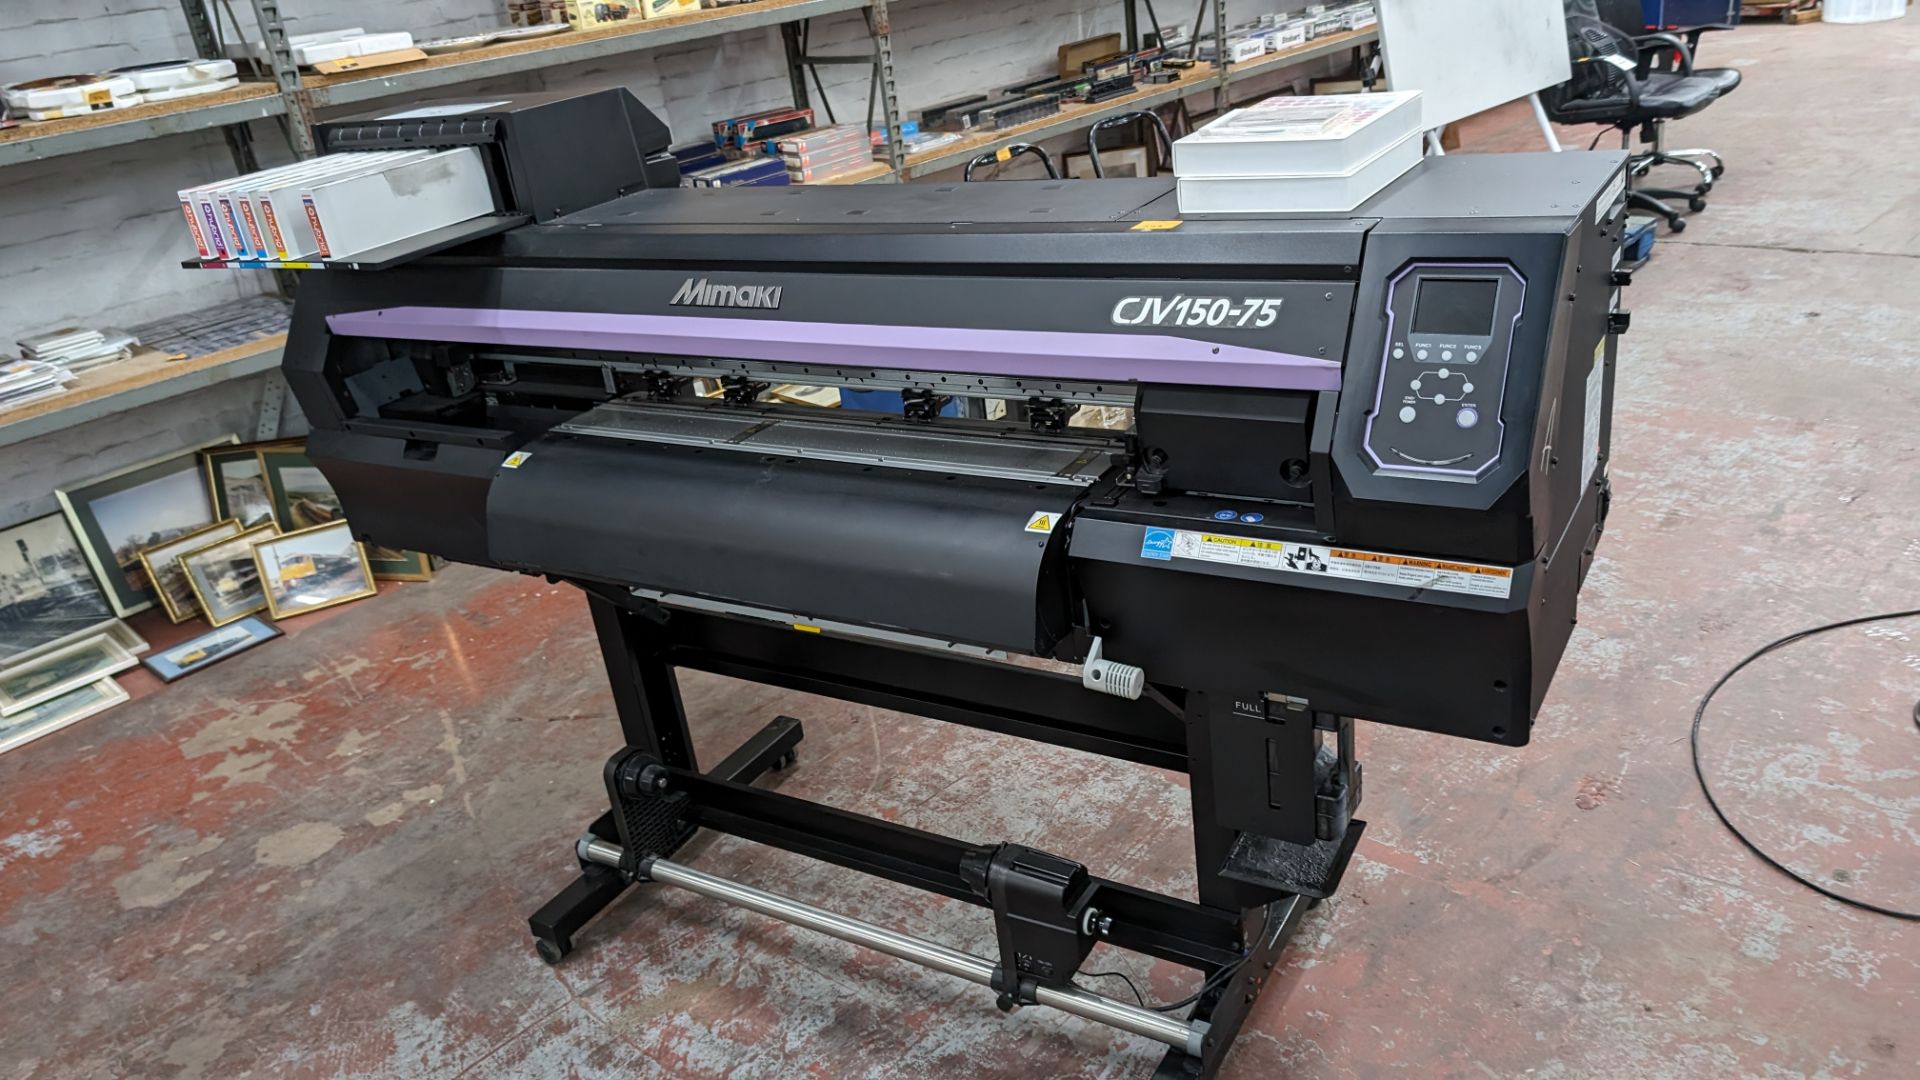 Mimaki CJV150-75 wide format printer including quantity of software as pictured, 800mm max print wid - Image 3 of 21